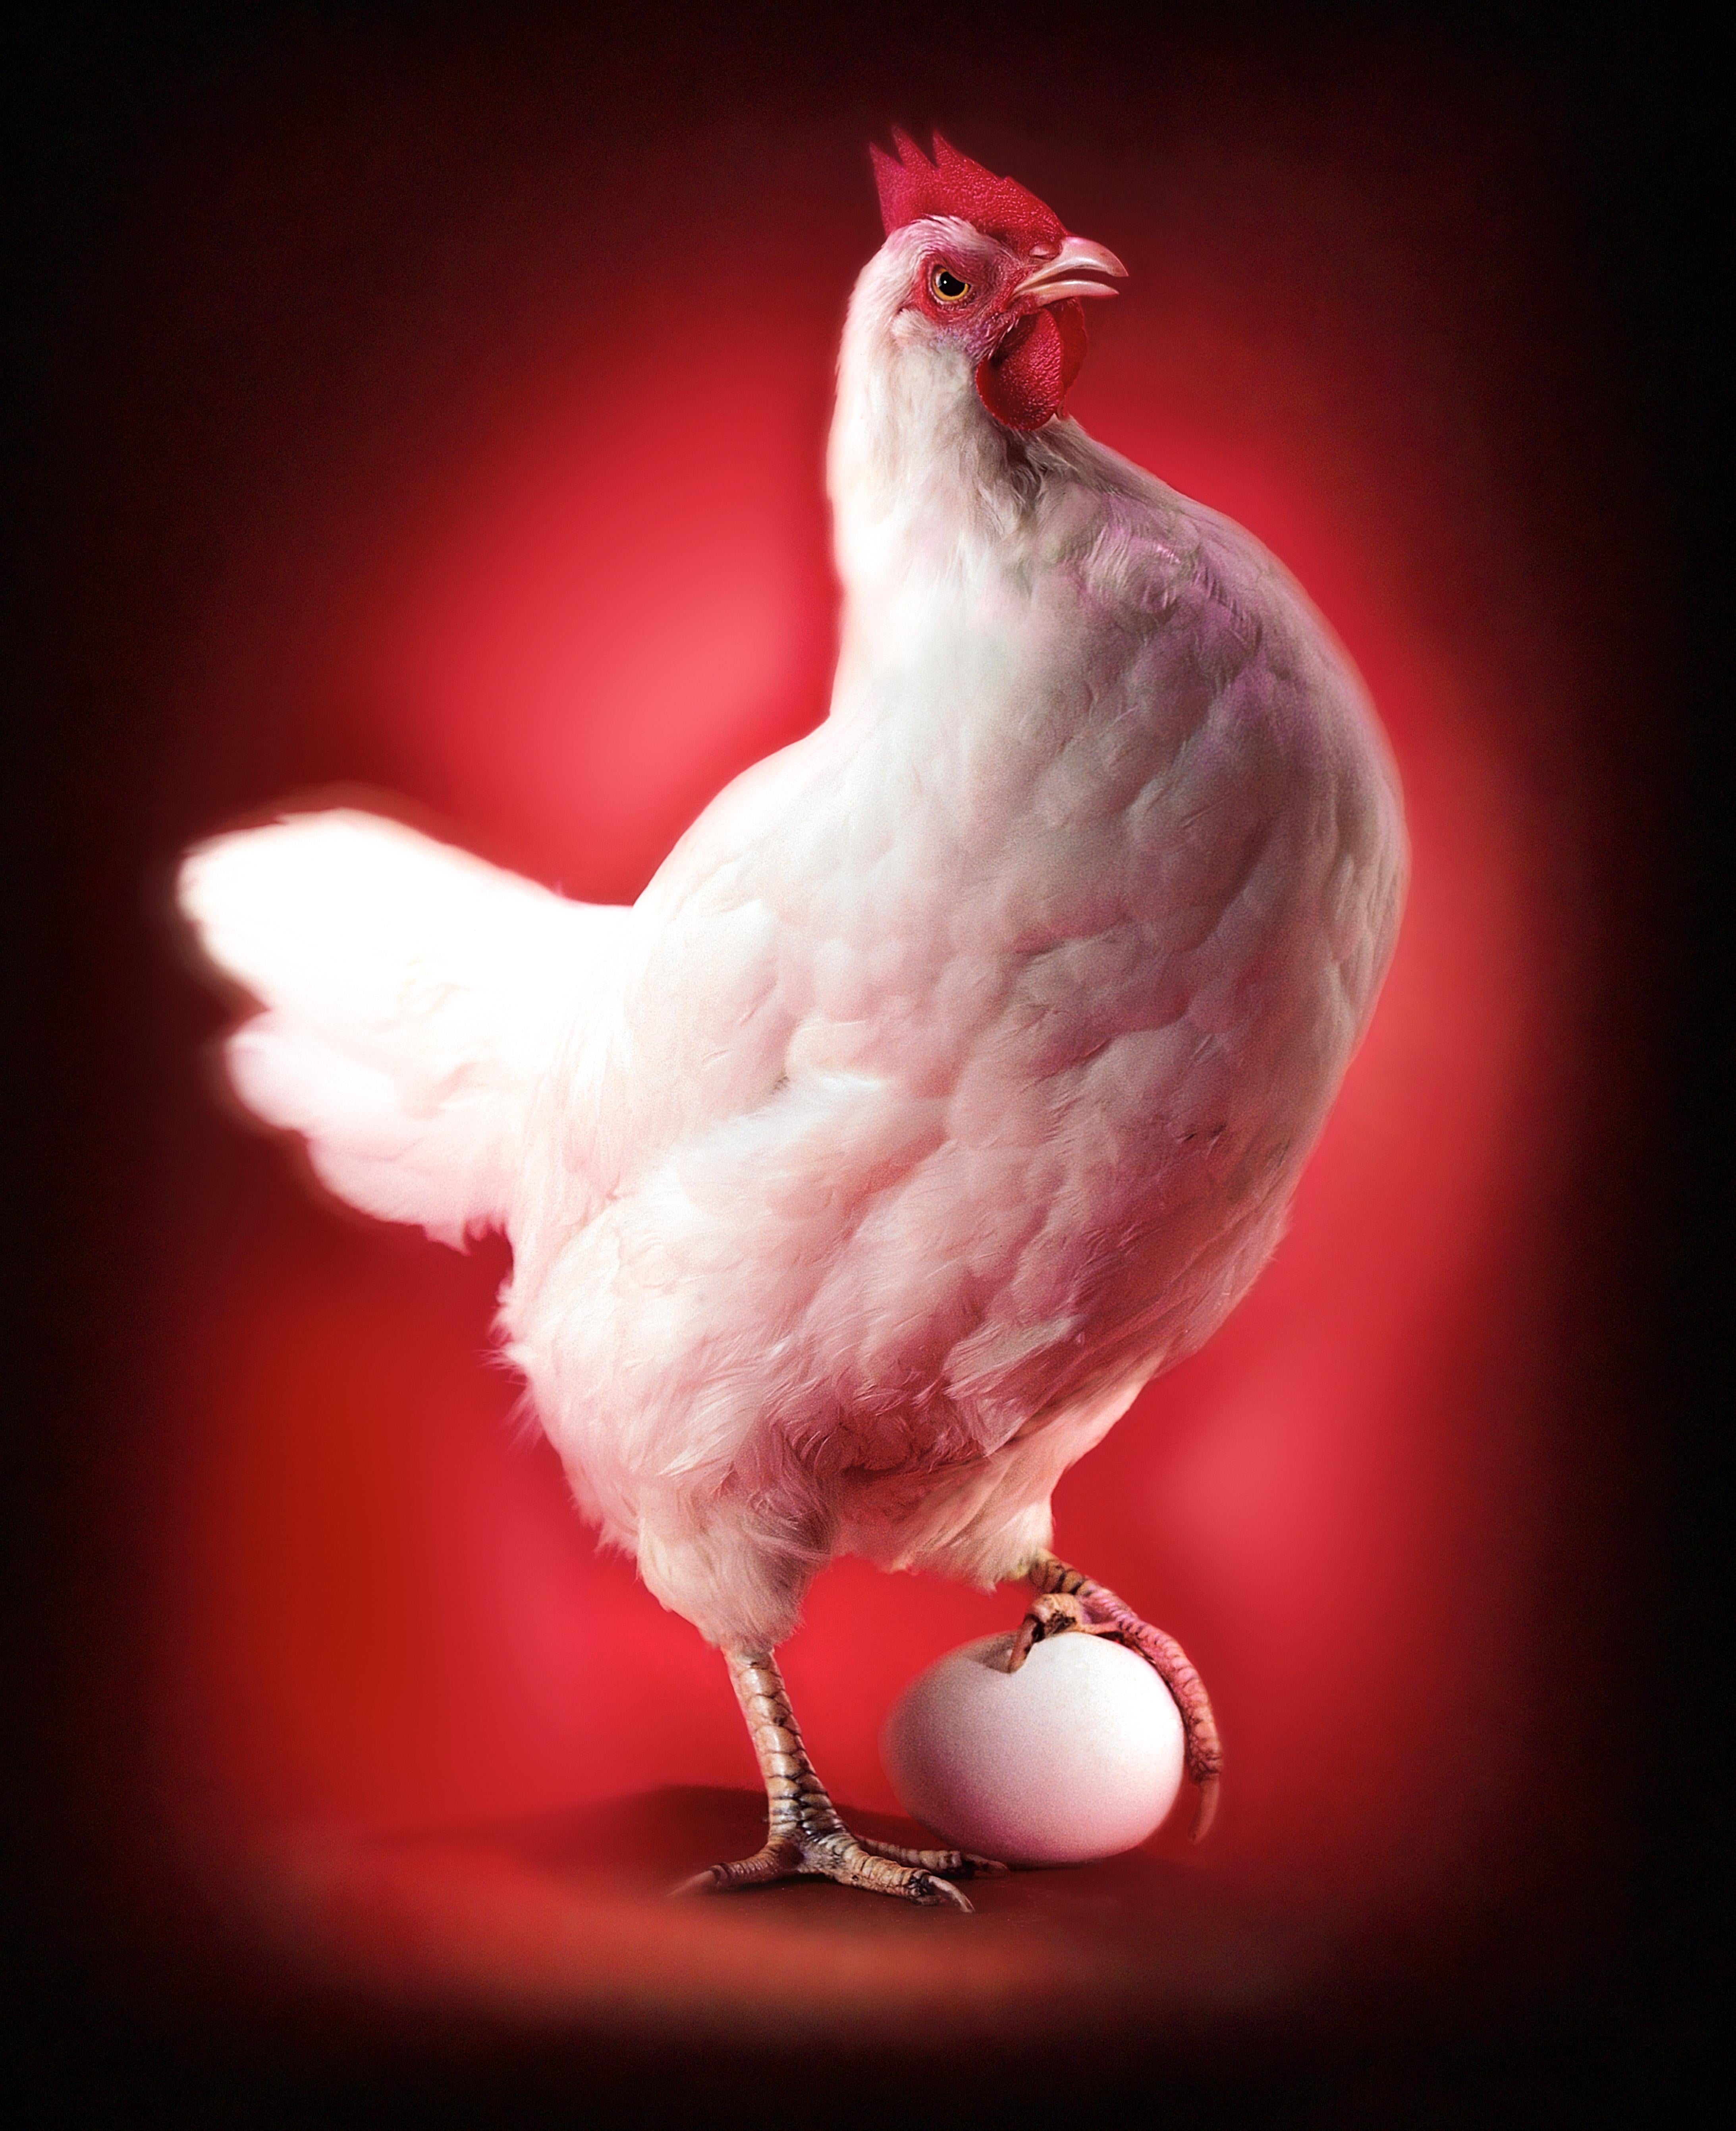 Nick Vedros Figurative Photograph - Chicken and Egg